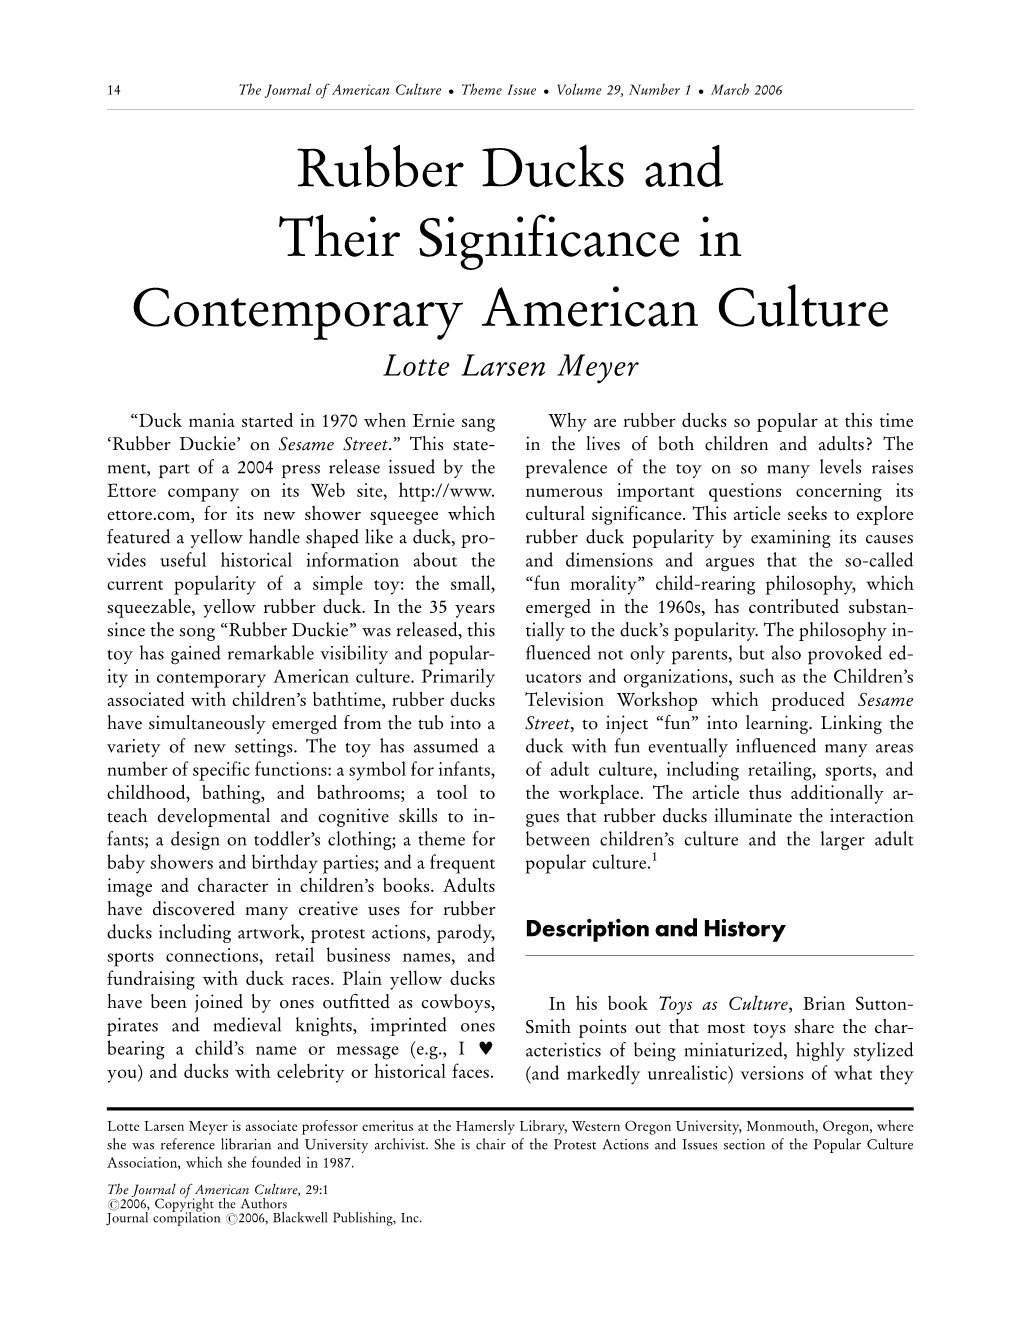 Rubber Ducks and Their Significance in Contemporary American Culture Lotte Larsen Meyer